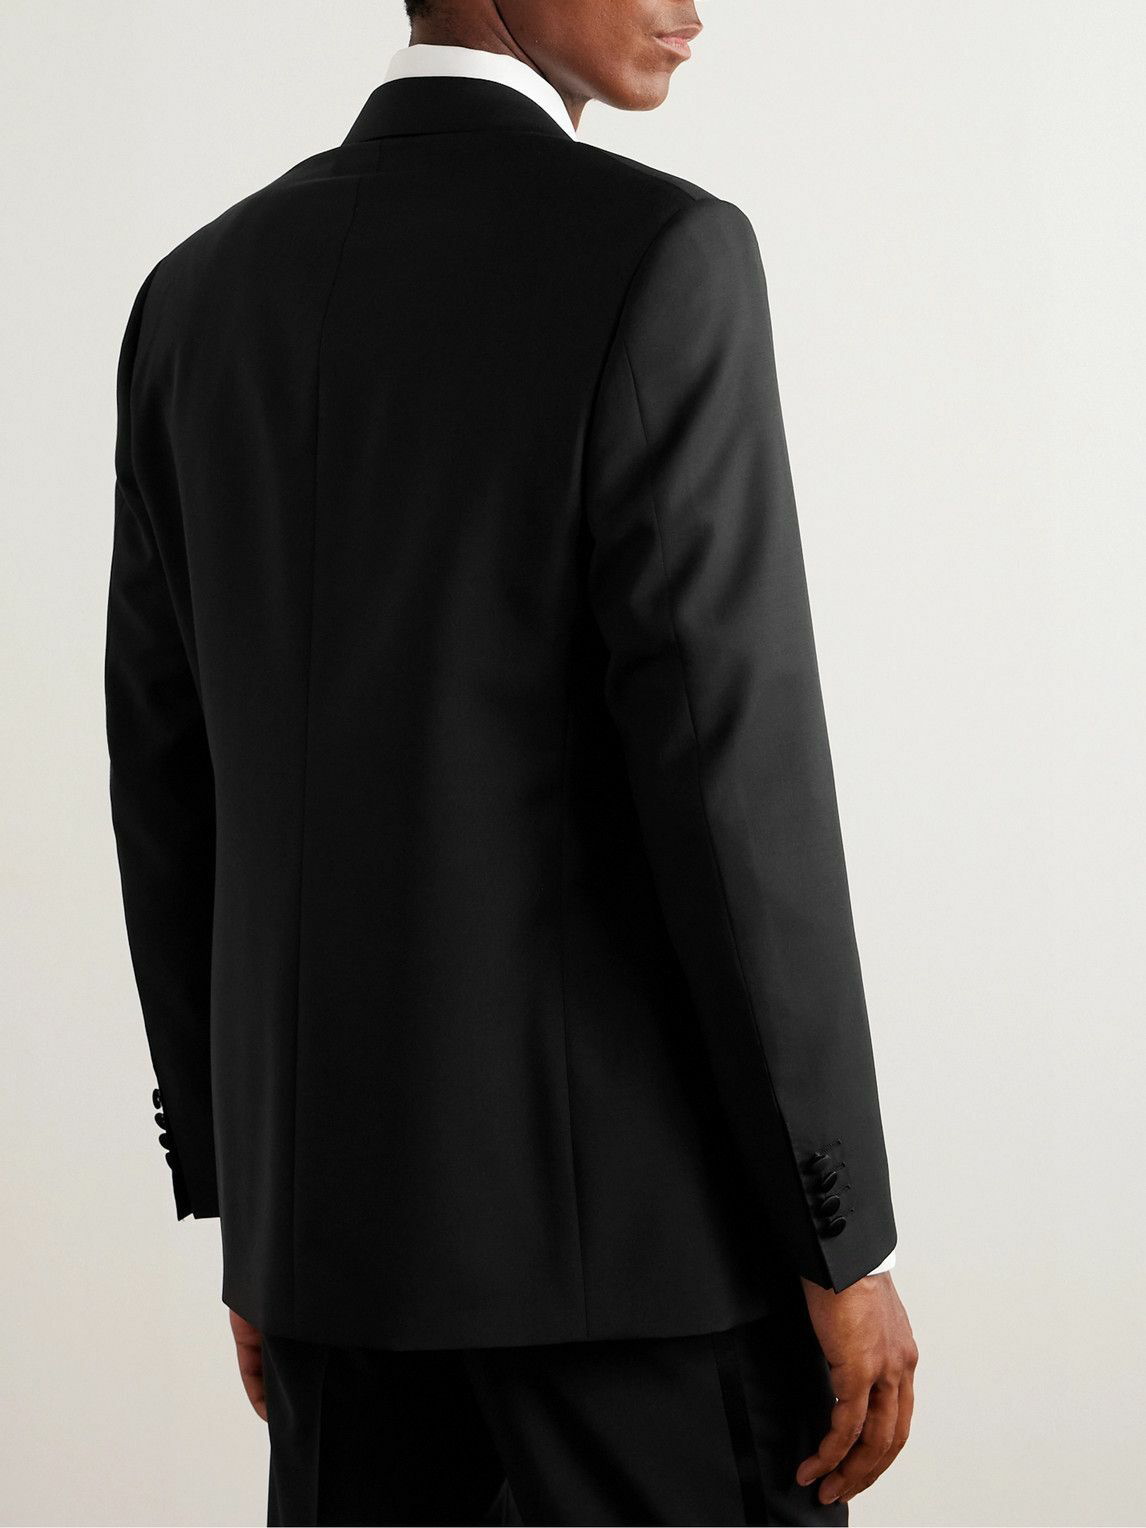 Canali - Satin-Trimmed Wool and Mohair-Blend Tuxedo Jacket - Black Canali